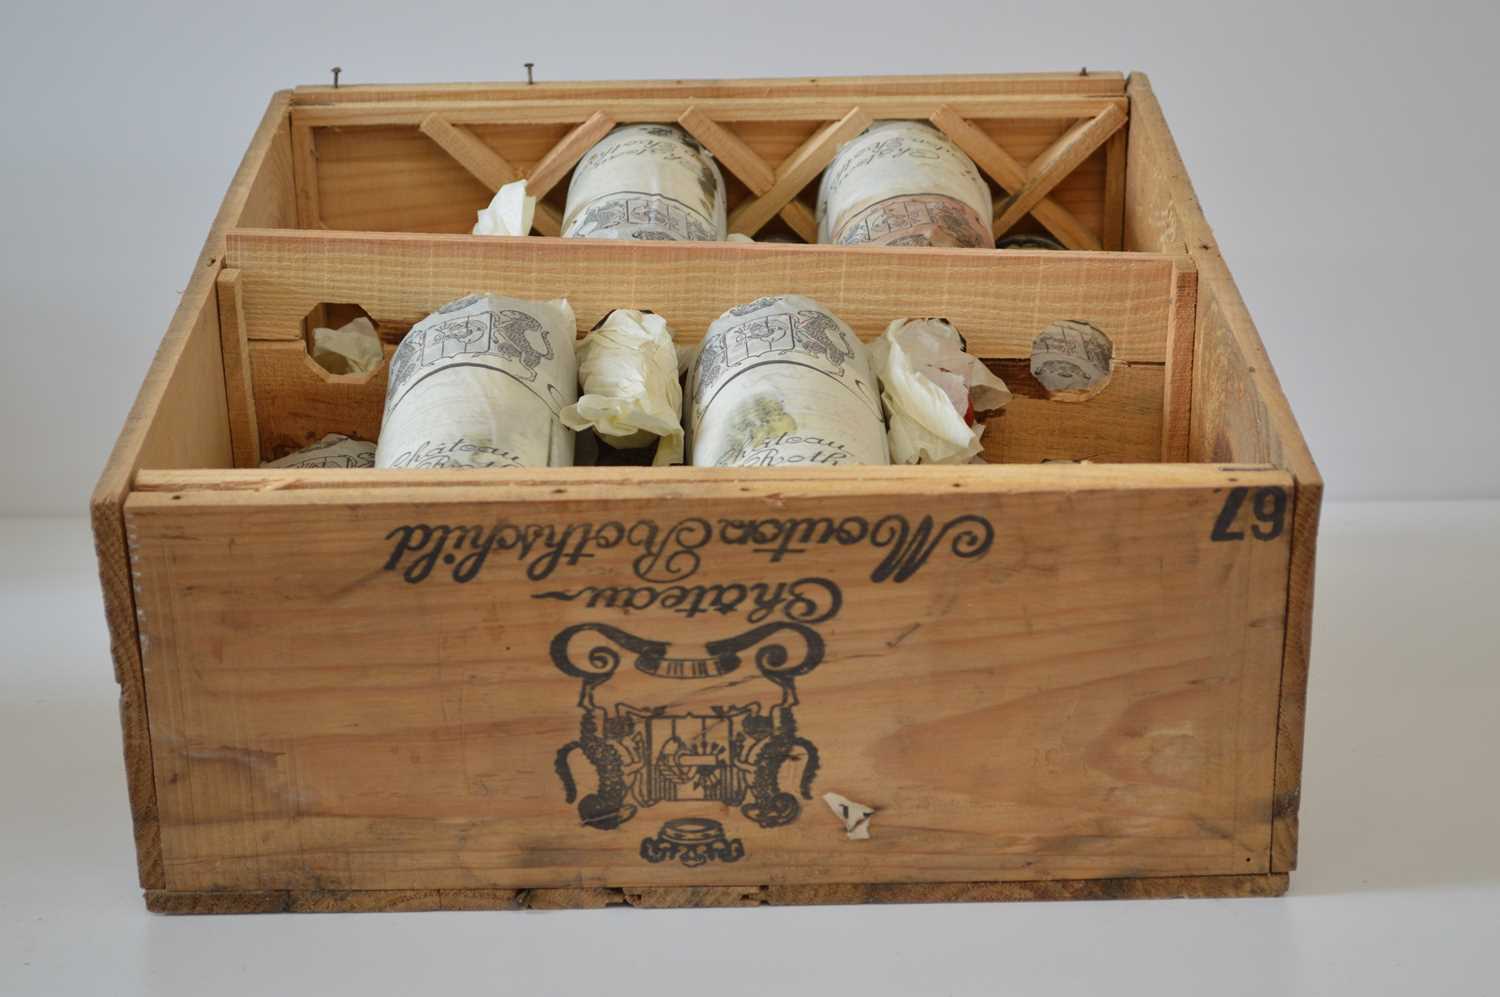 Lot 14 - 10 bottles in previously unopened OWC Chateau Mouton Rothschild 1er Grand Cru Classe Pauillac 1967